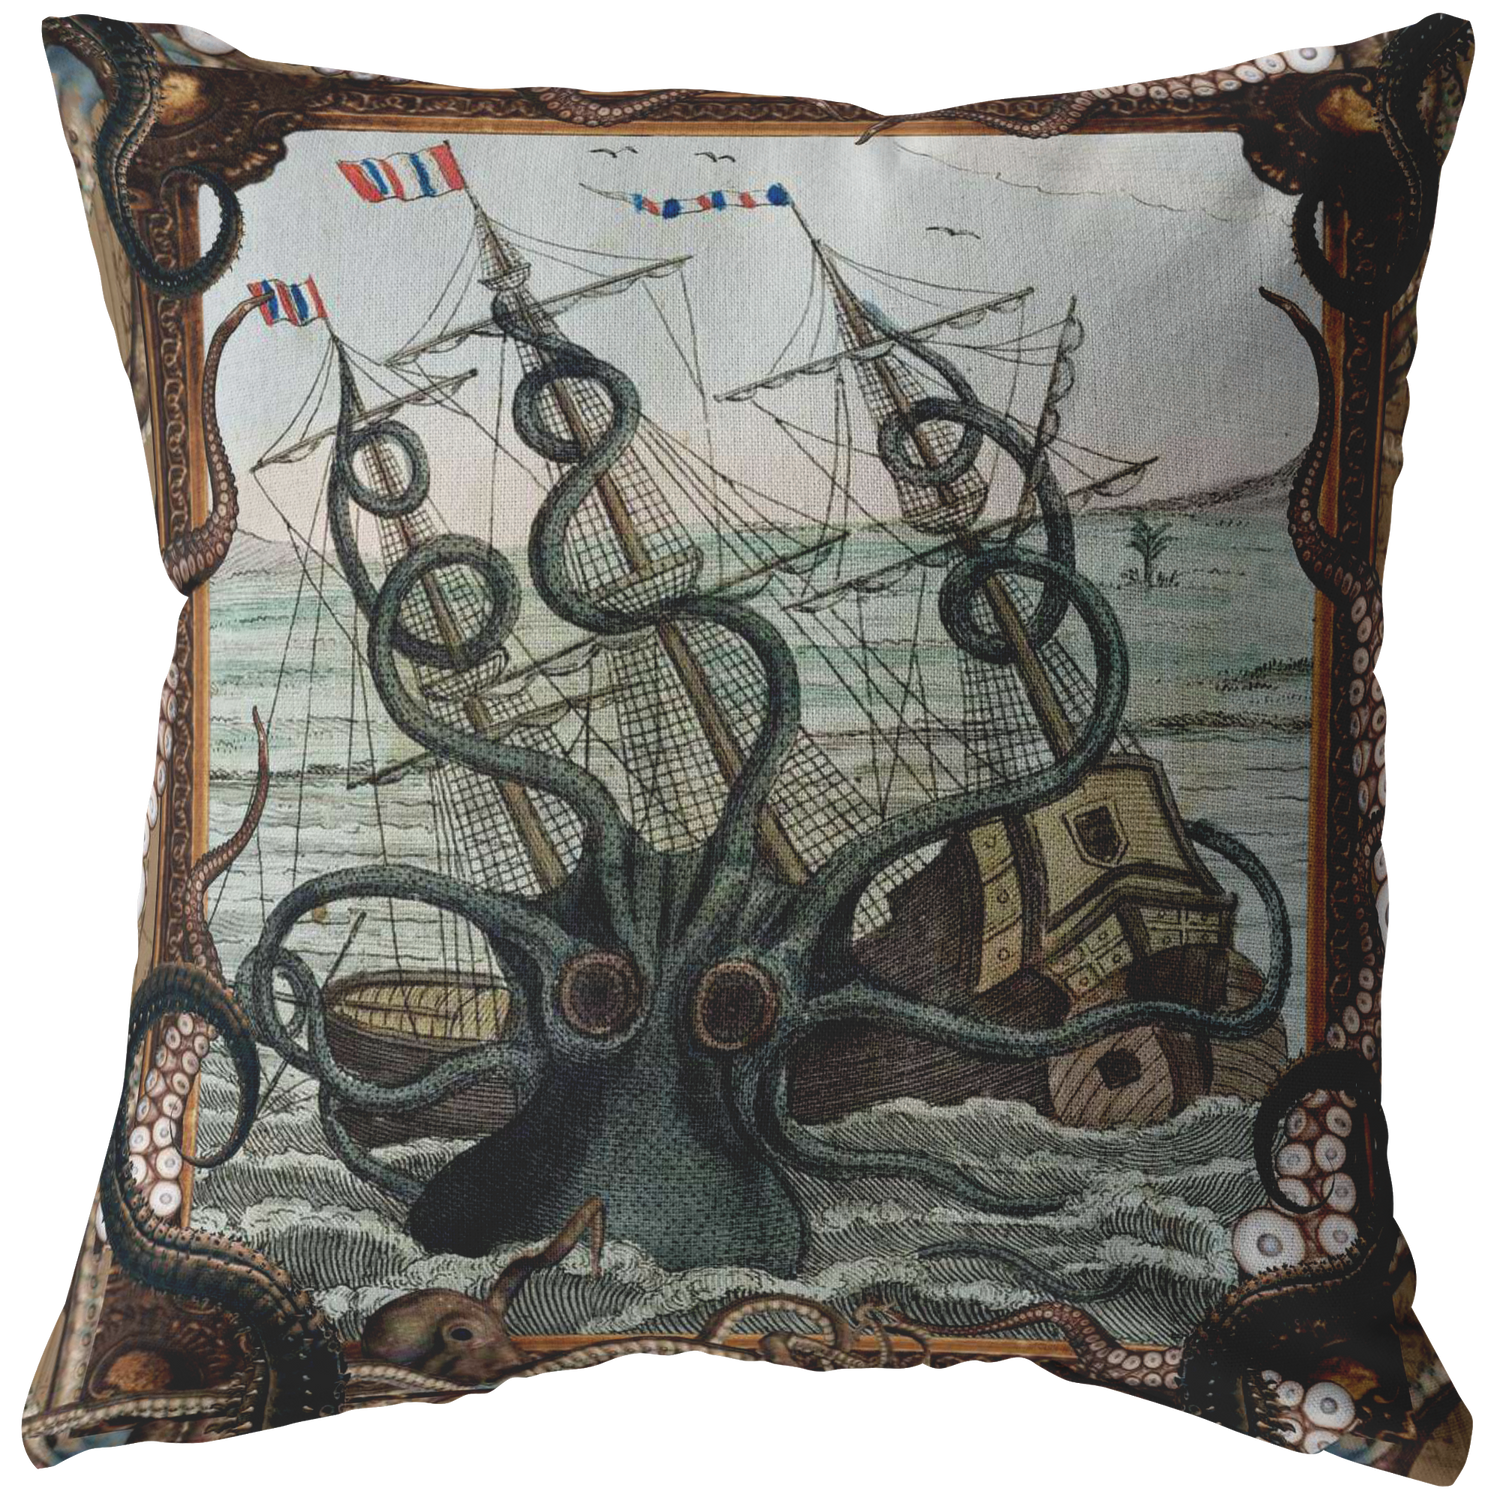 Pirate Blankets & Pillows